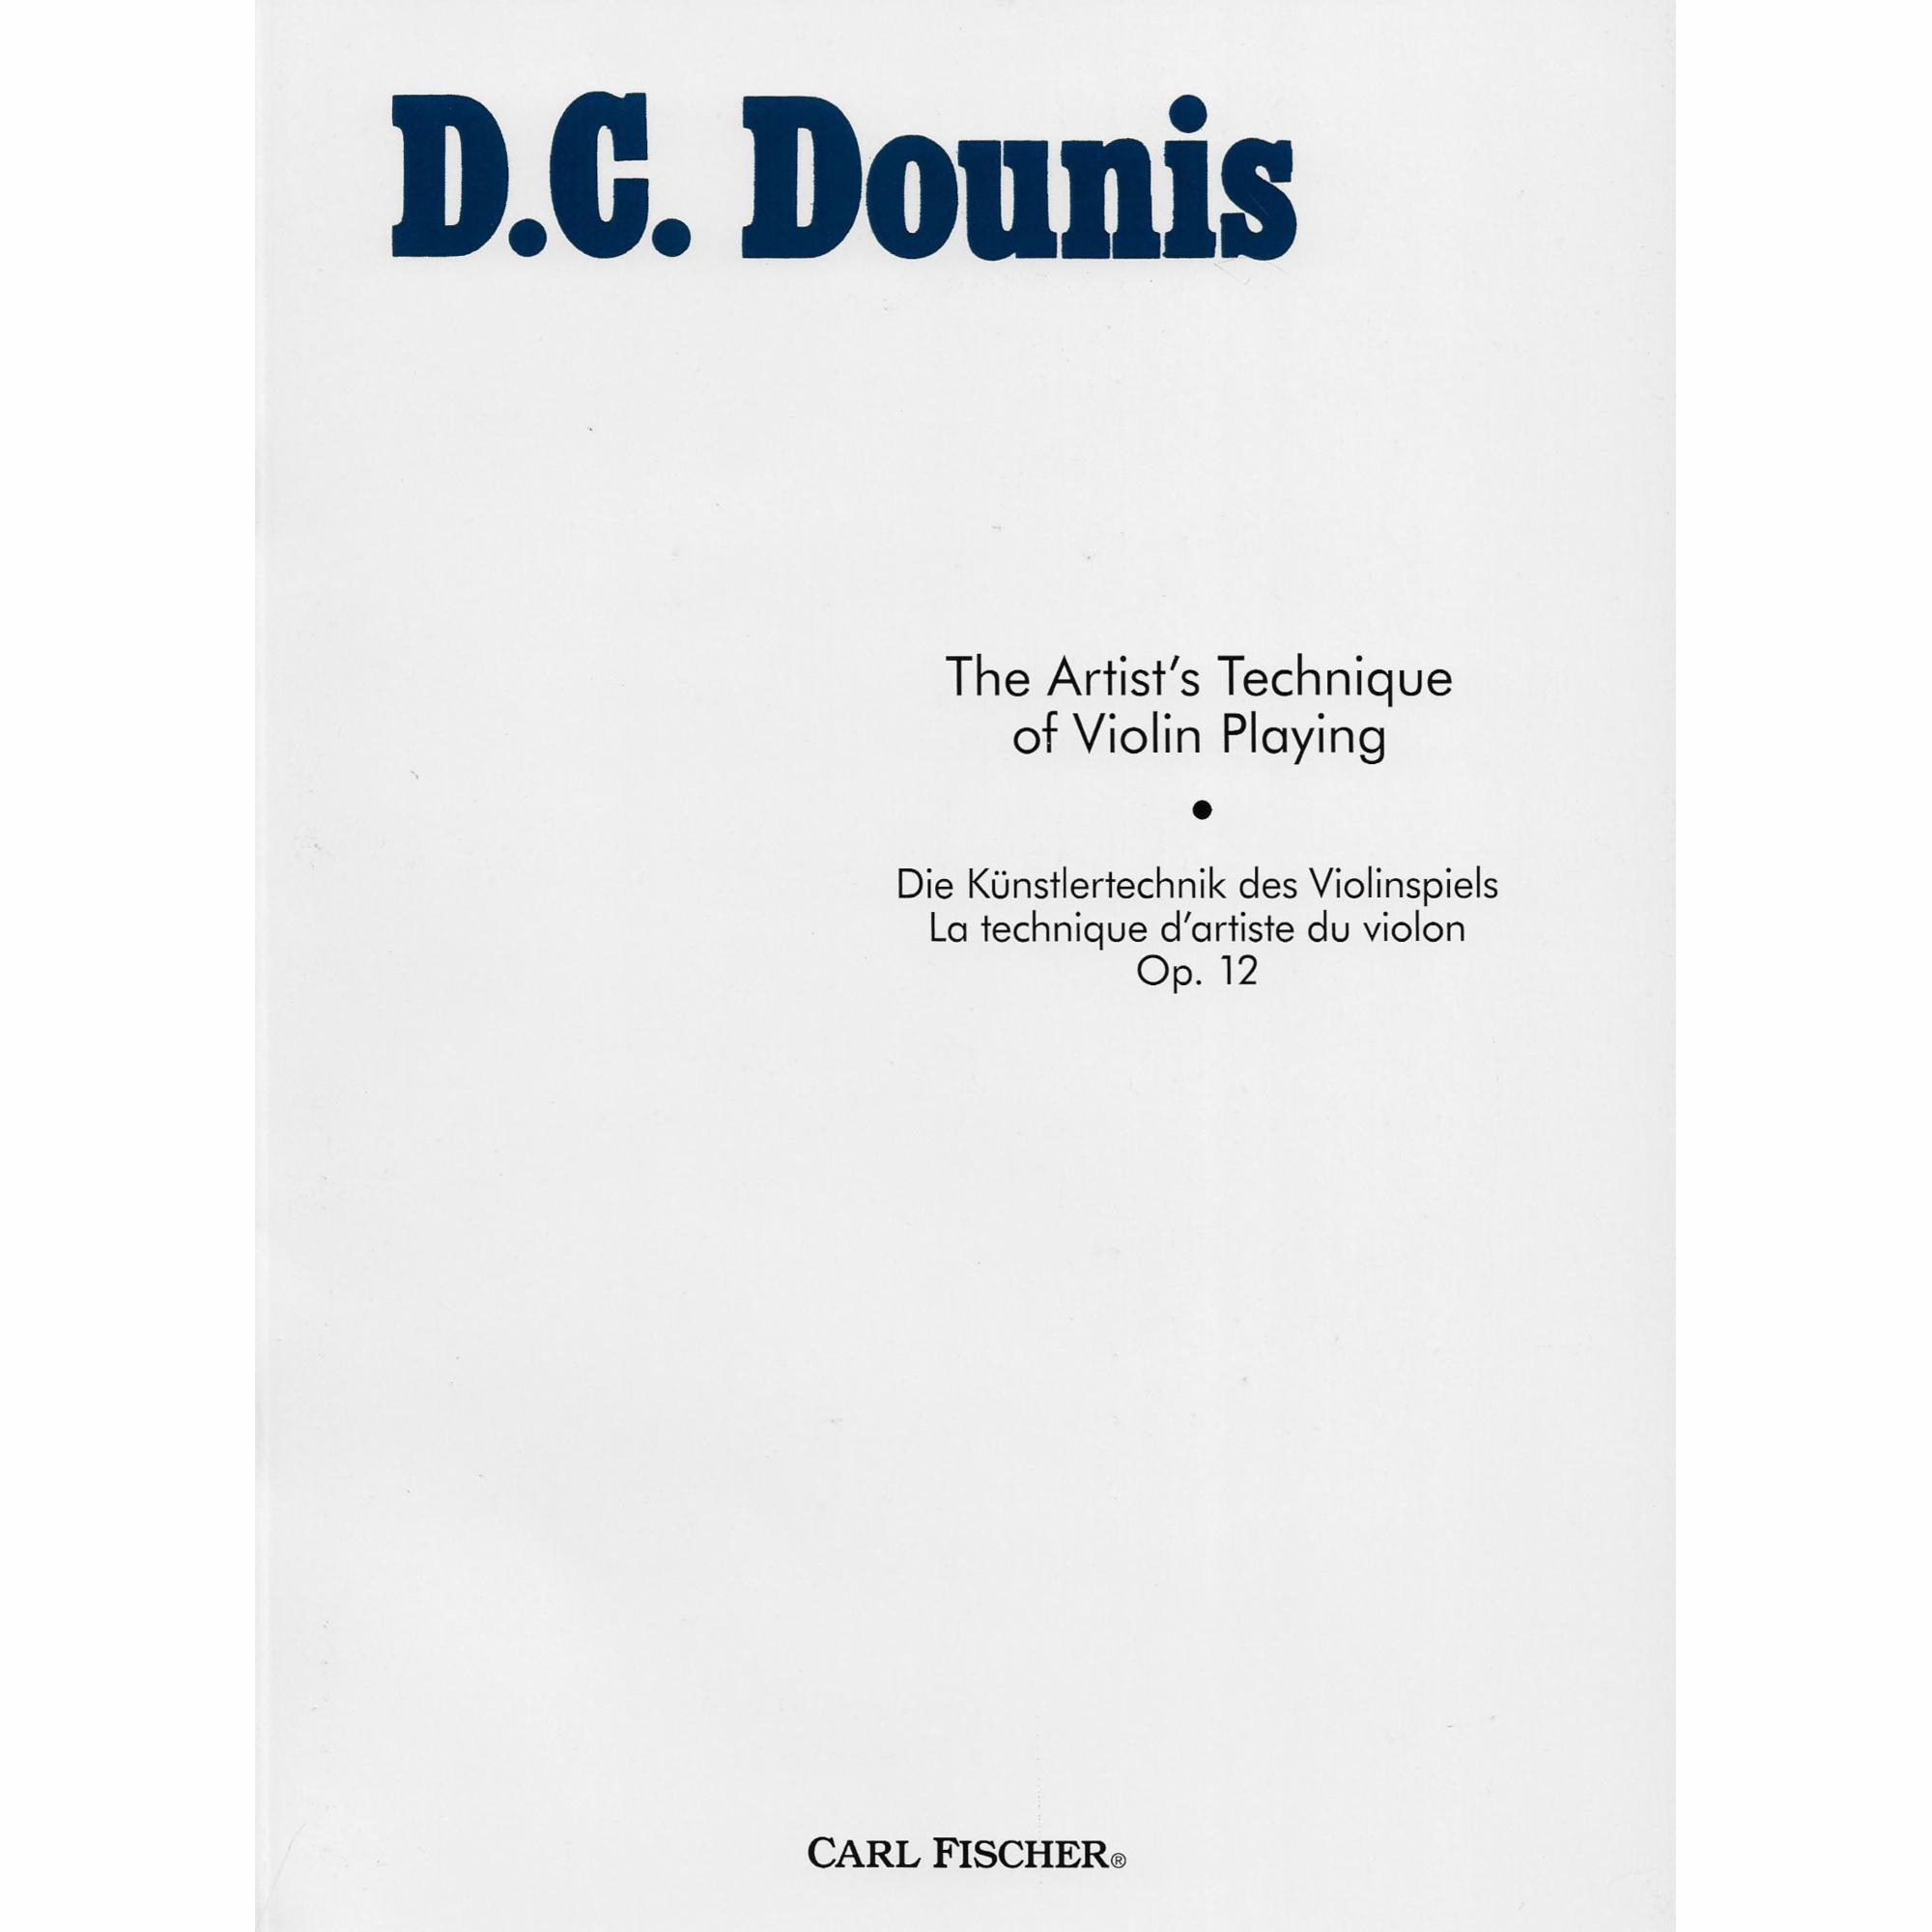 Dounis -- The Artist's Technique of Violin Playing, Op. 12